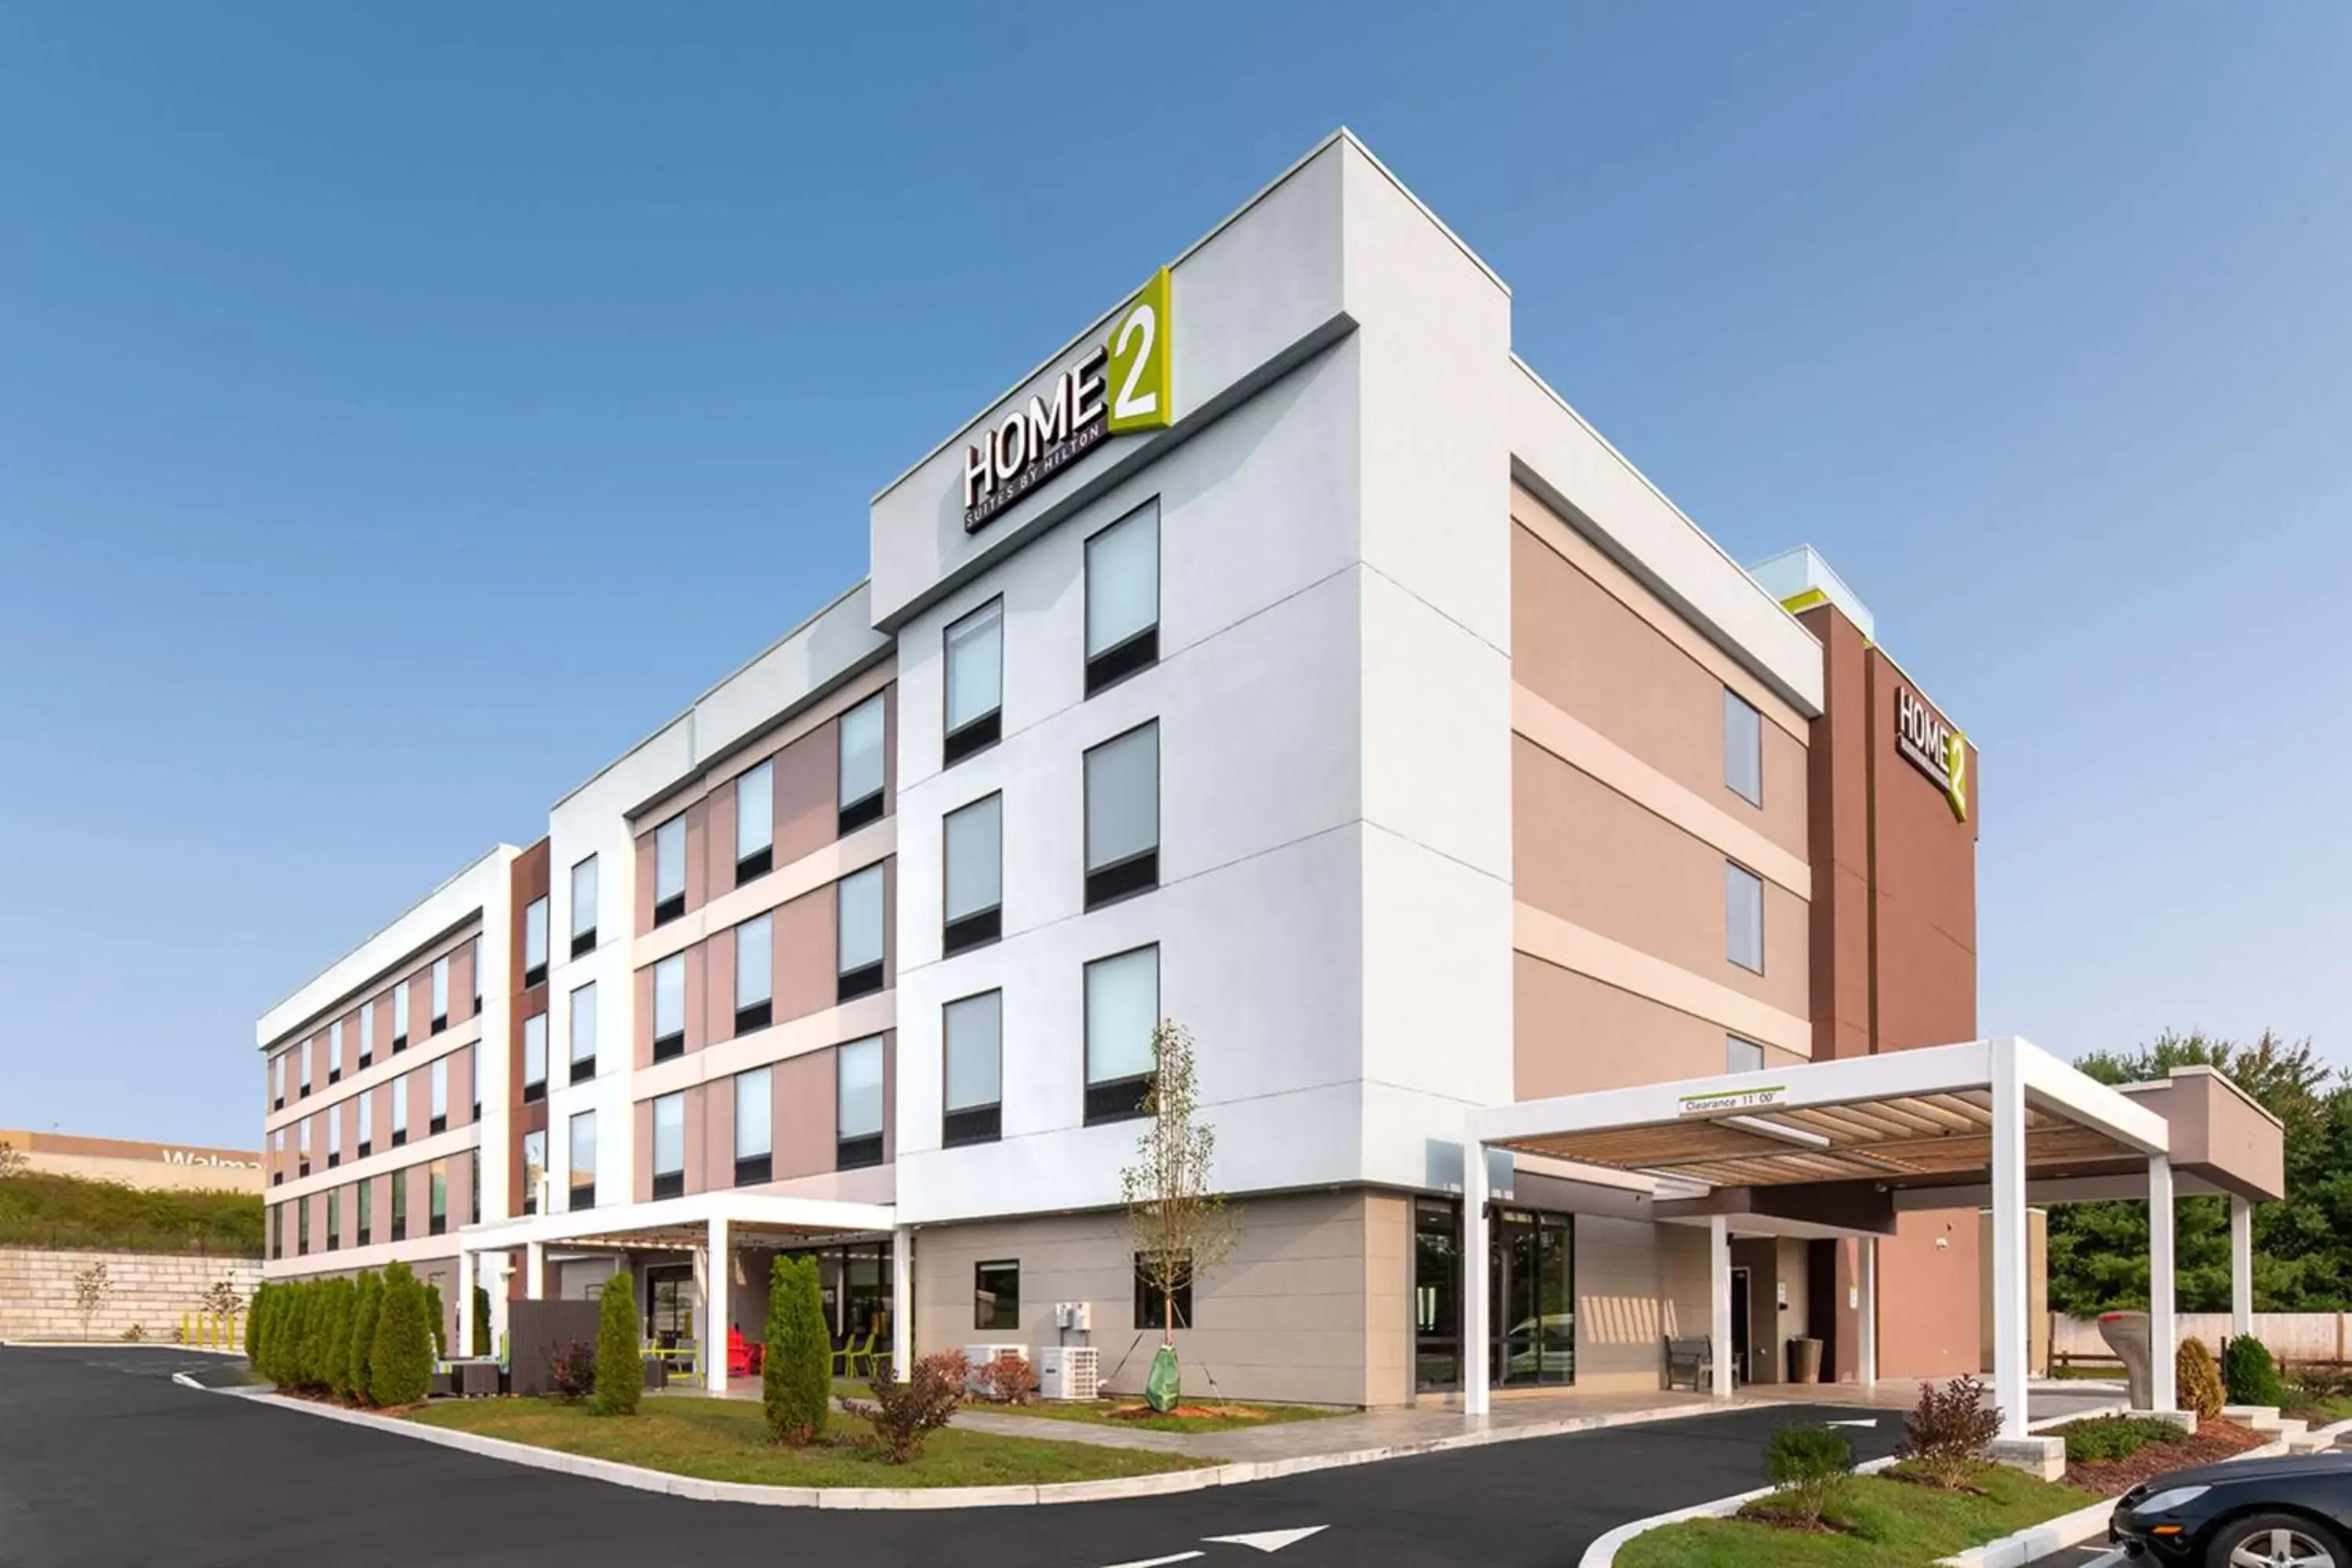 Property Building in Home2 Suites By Hilton Raynham Taunton